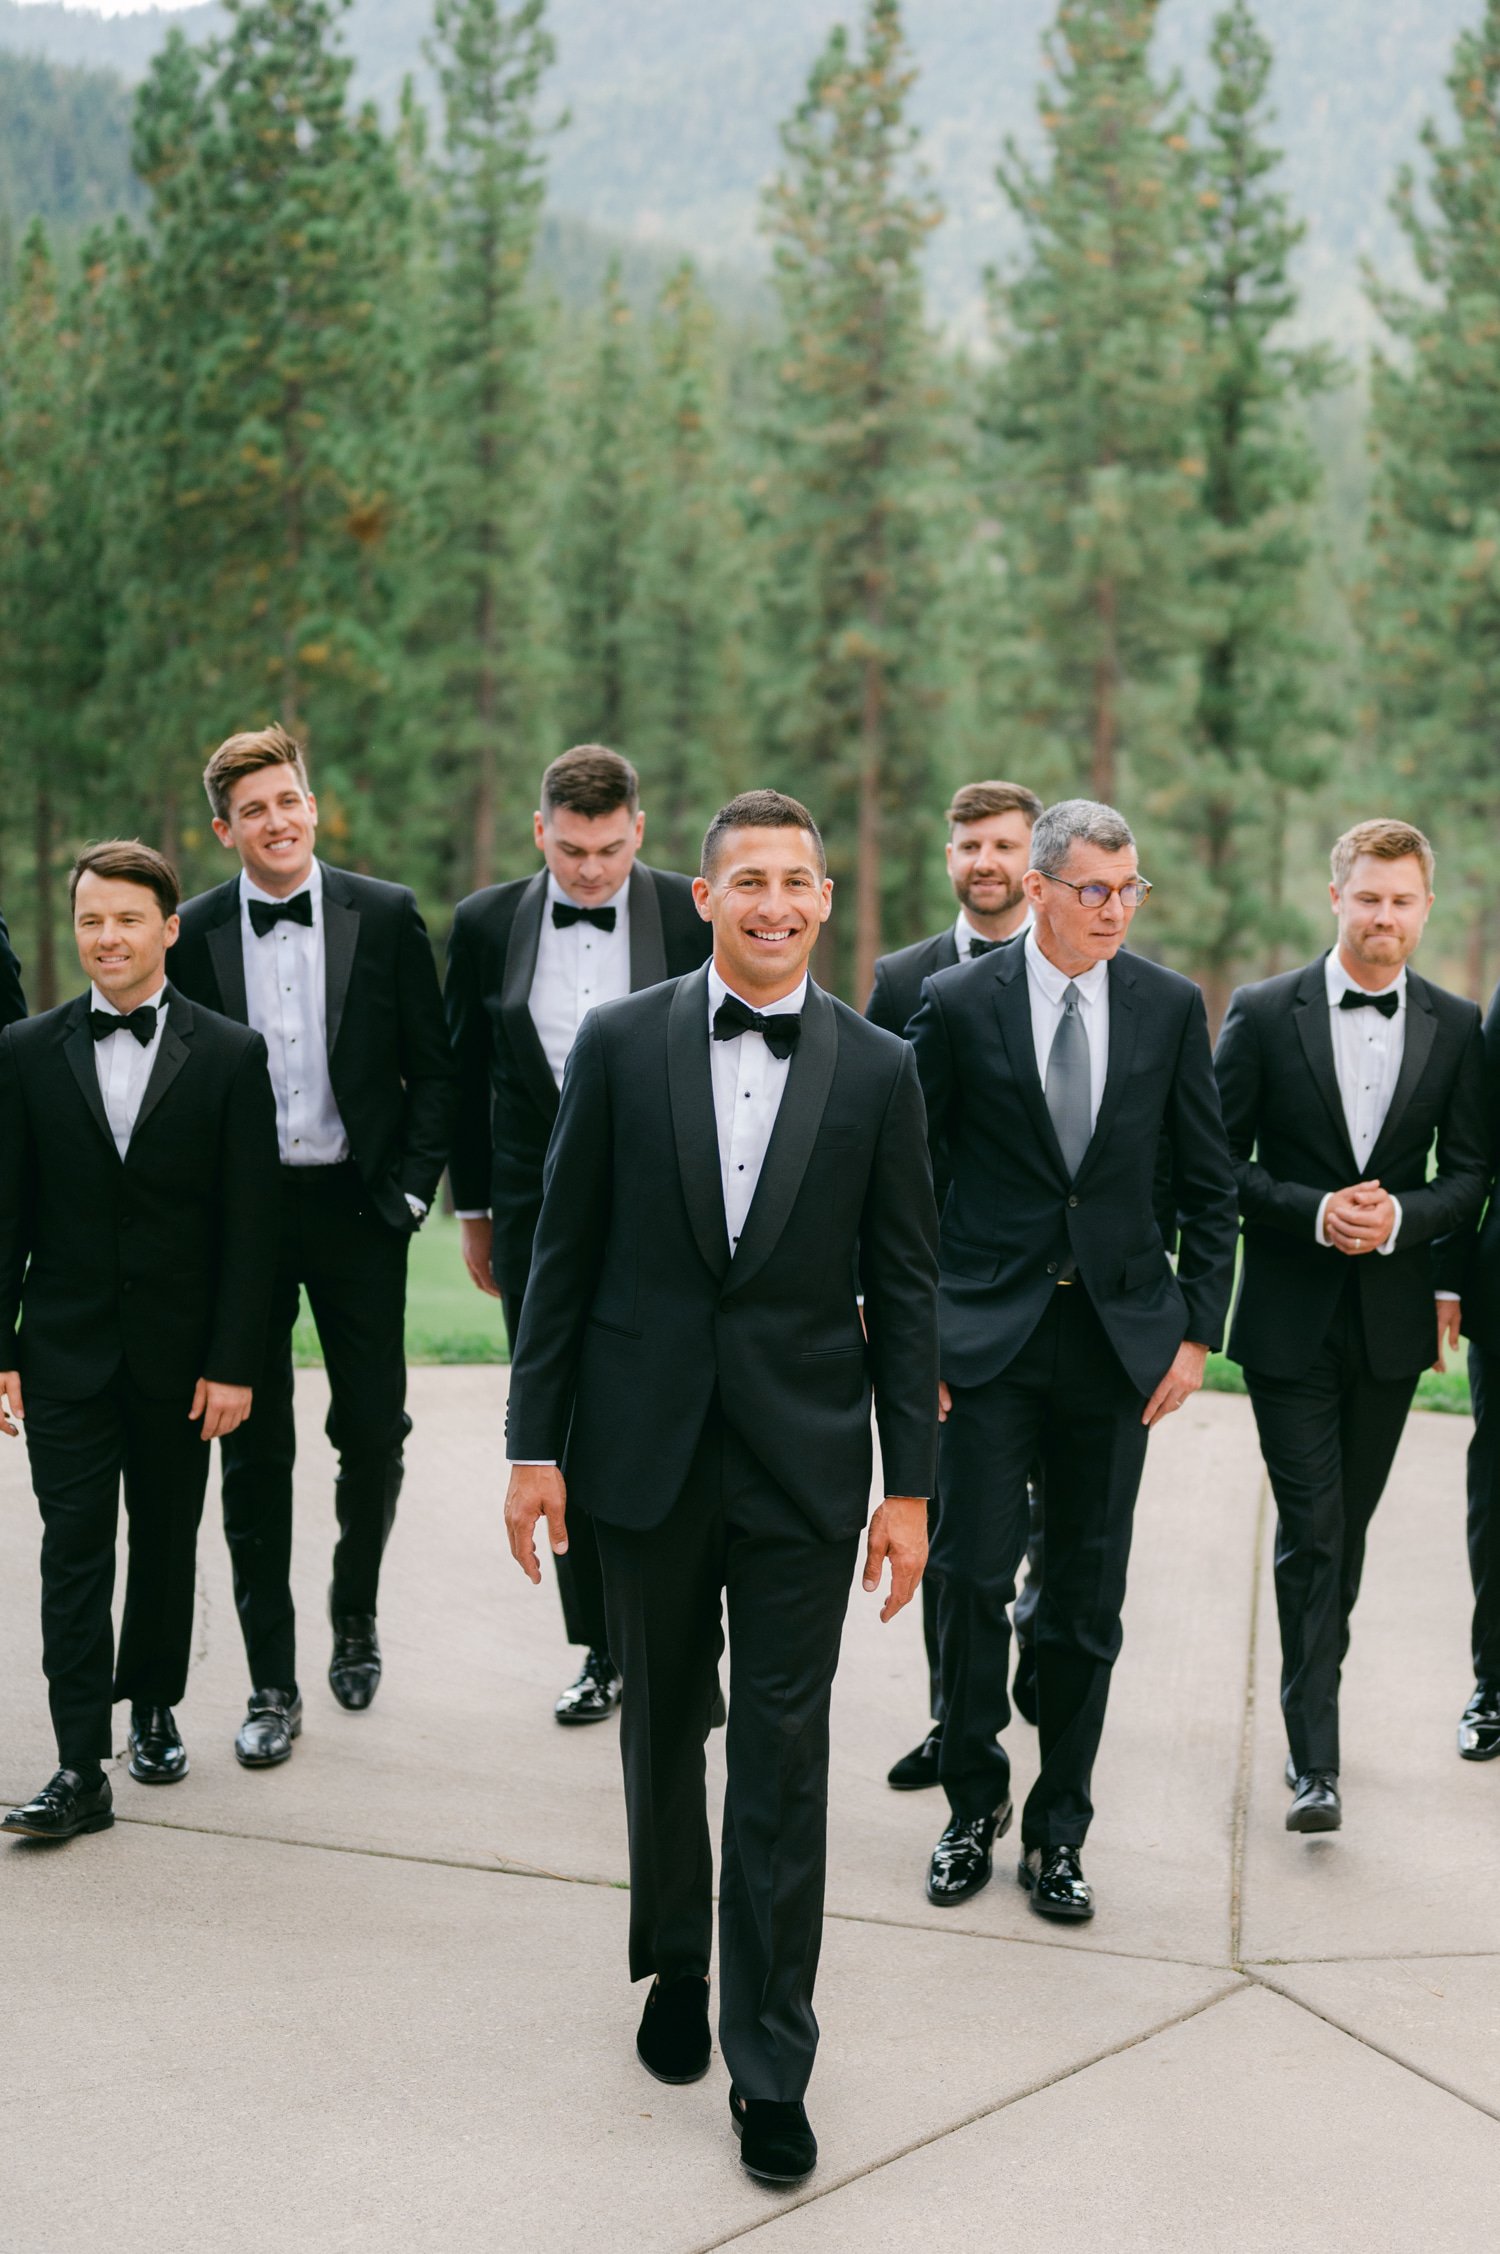 Martis Camp Wedding, photo of the groom and groomsmen walking to the ceremony with tall tress on their background